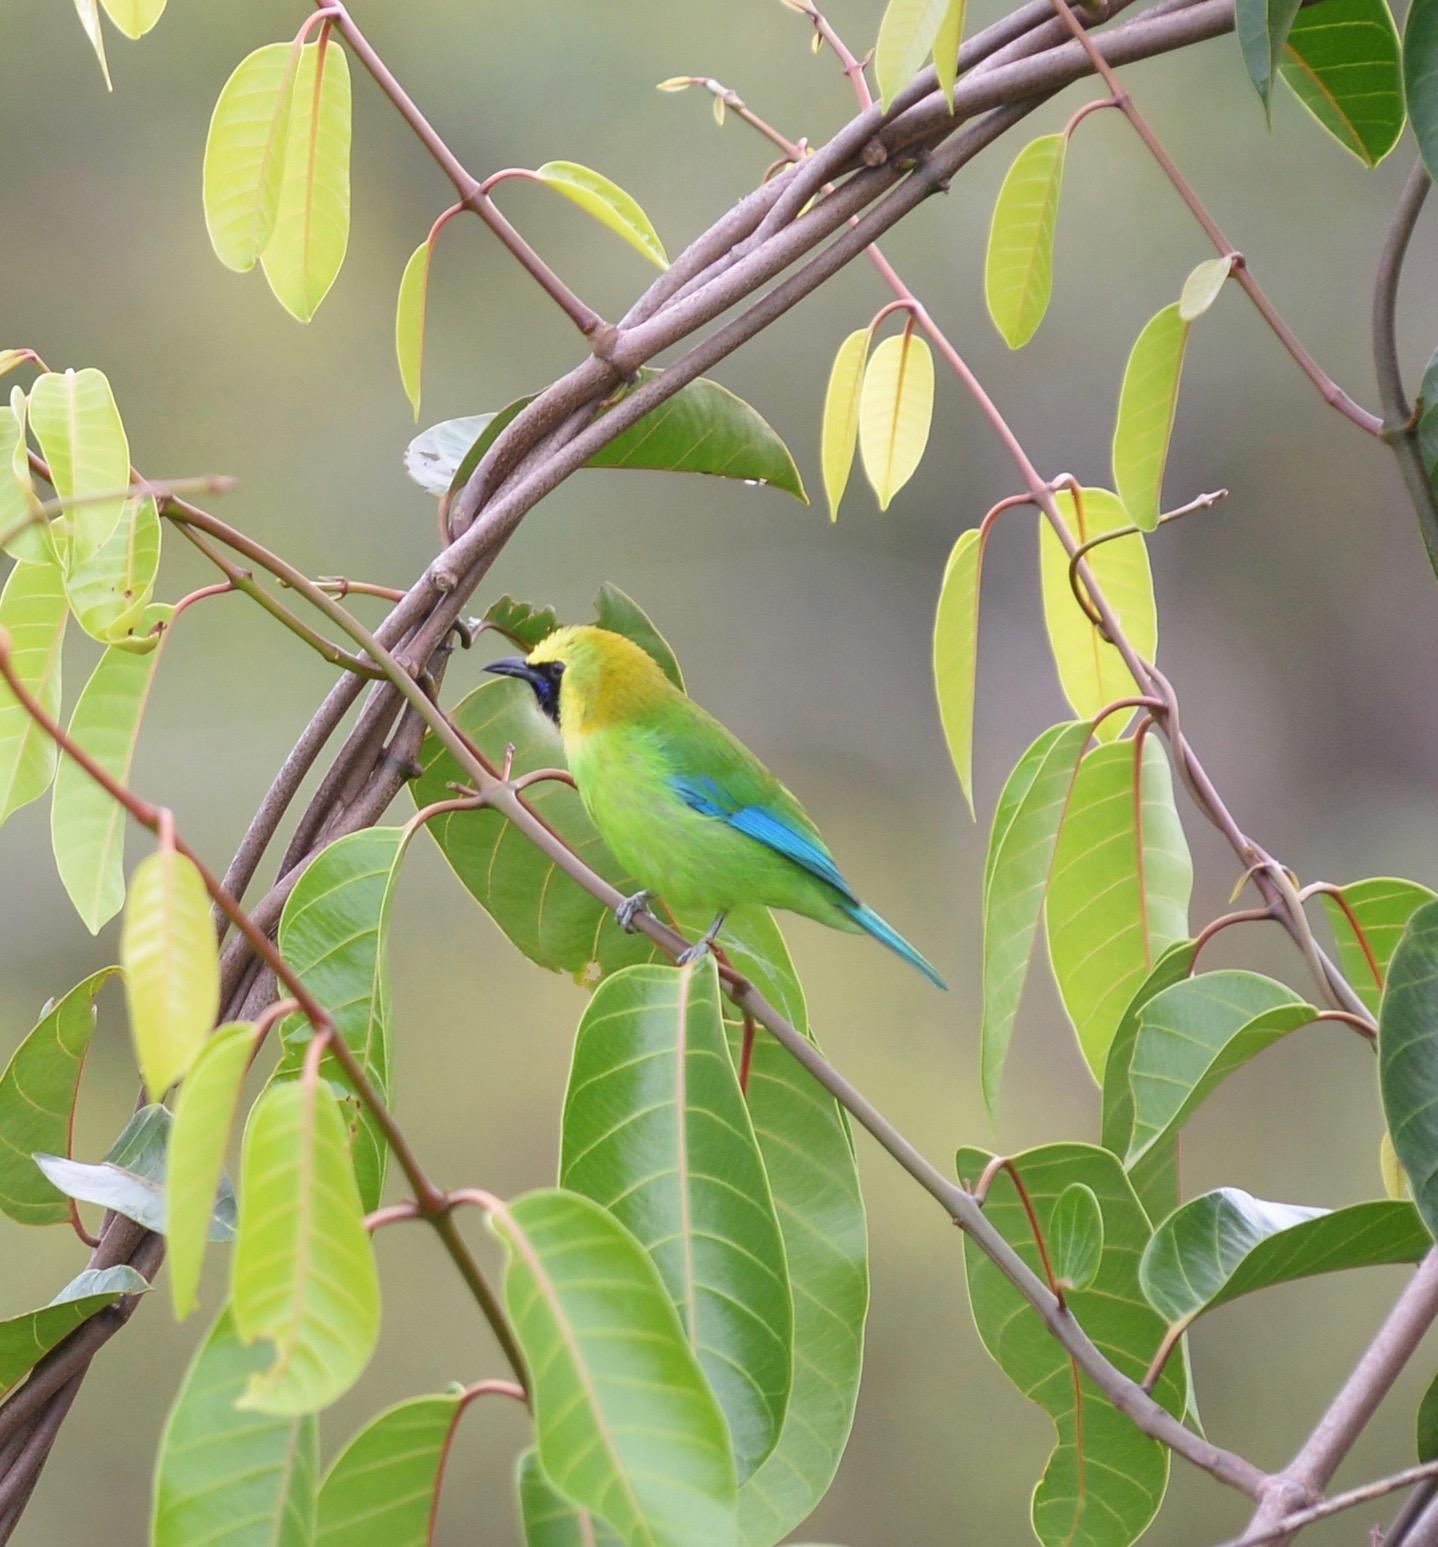 Blue-winged Leafbird Photo by marcel finlay